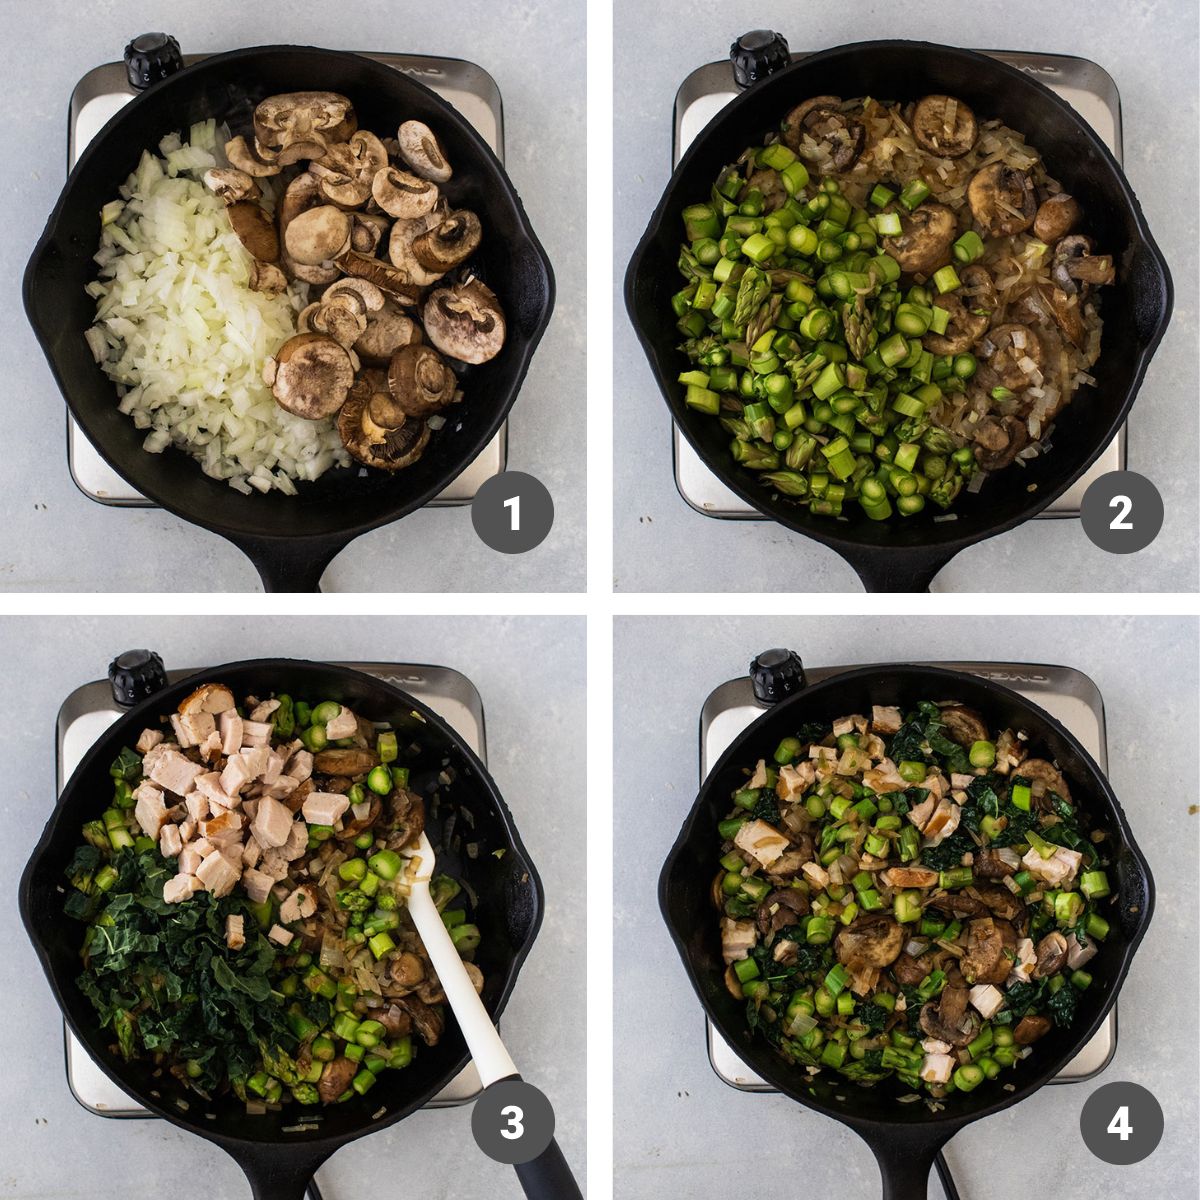 Cooking mushrooms and veggies in a cast iron skillet.